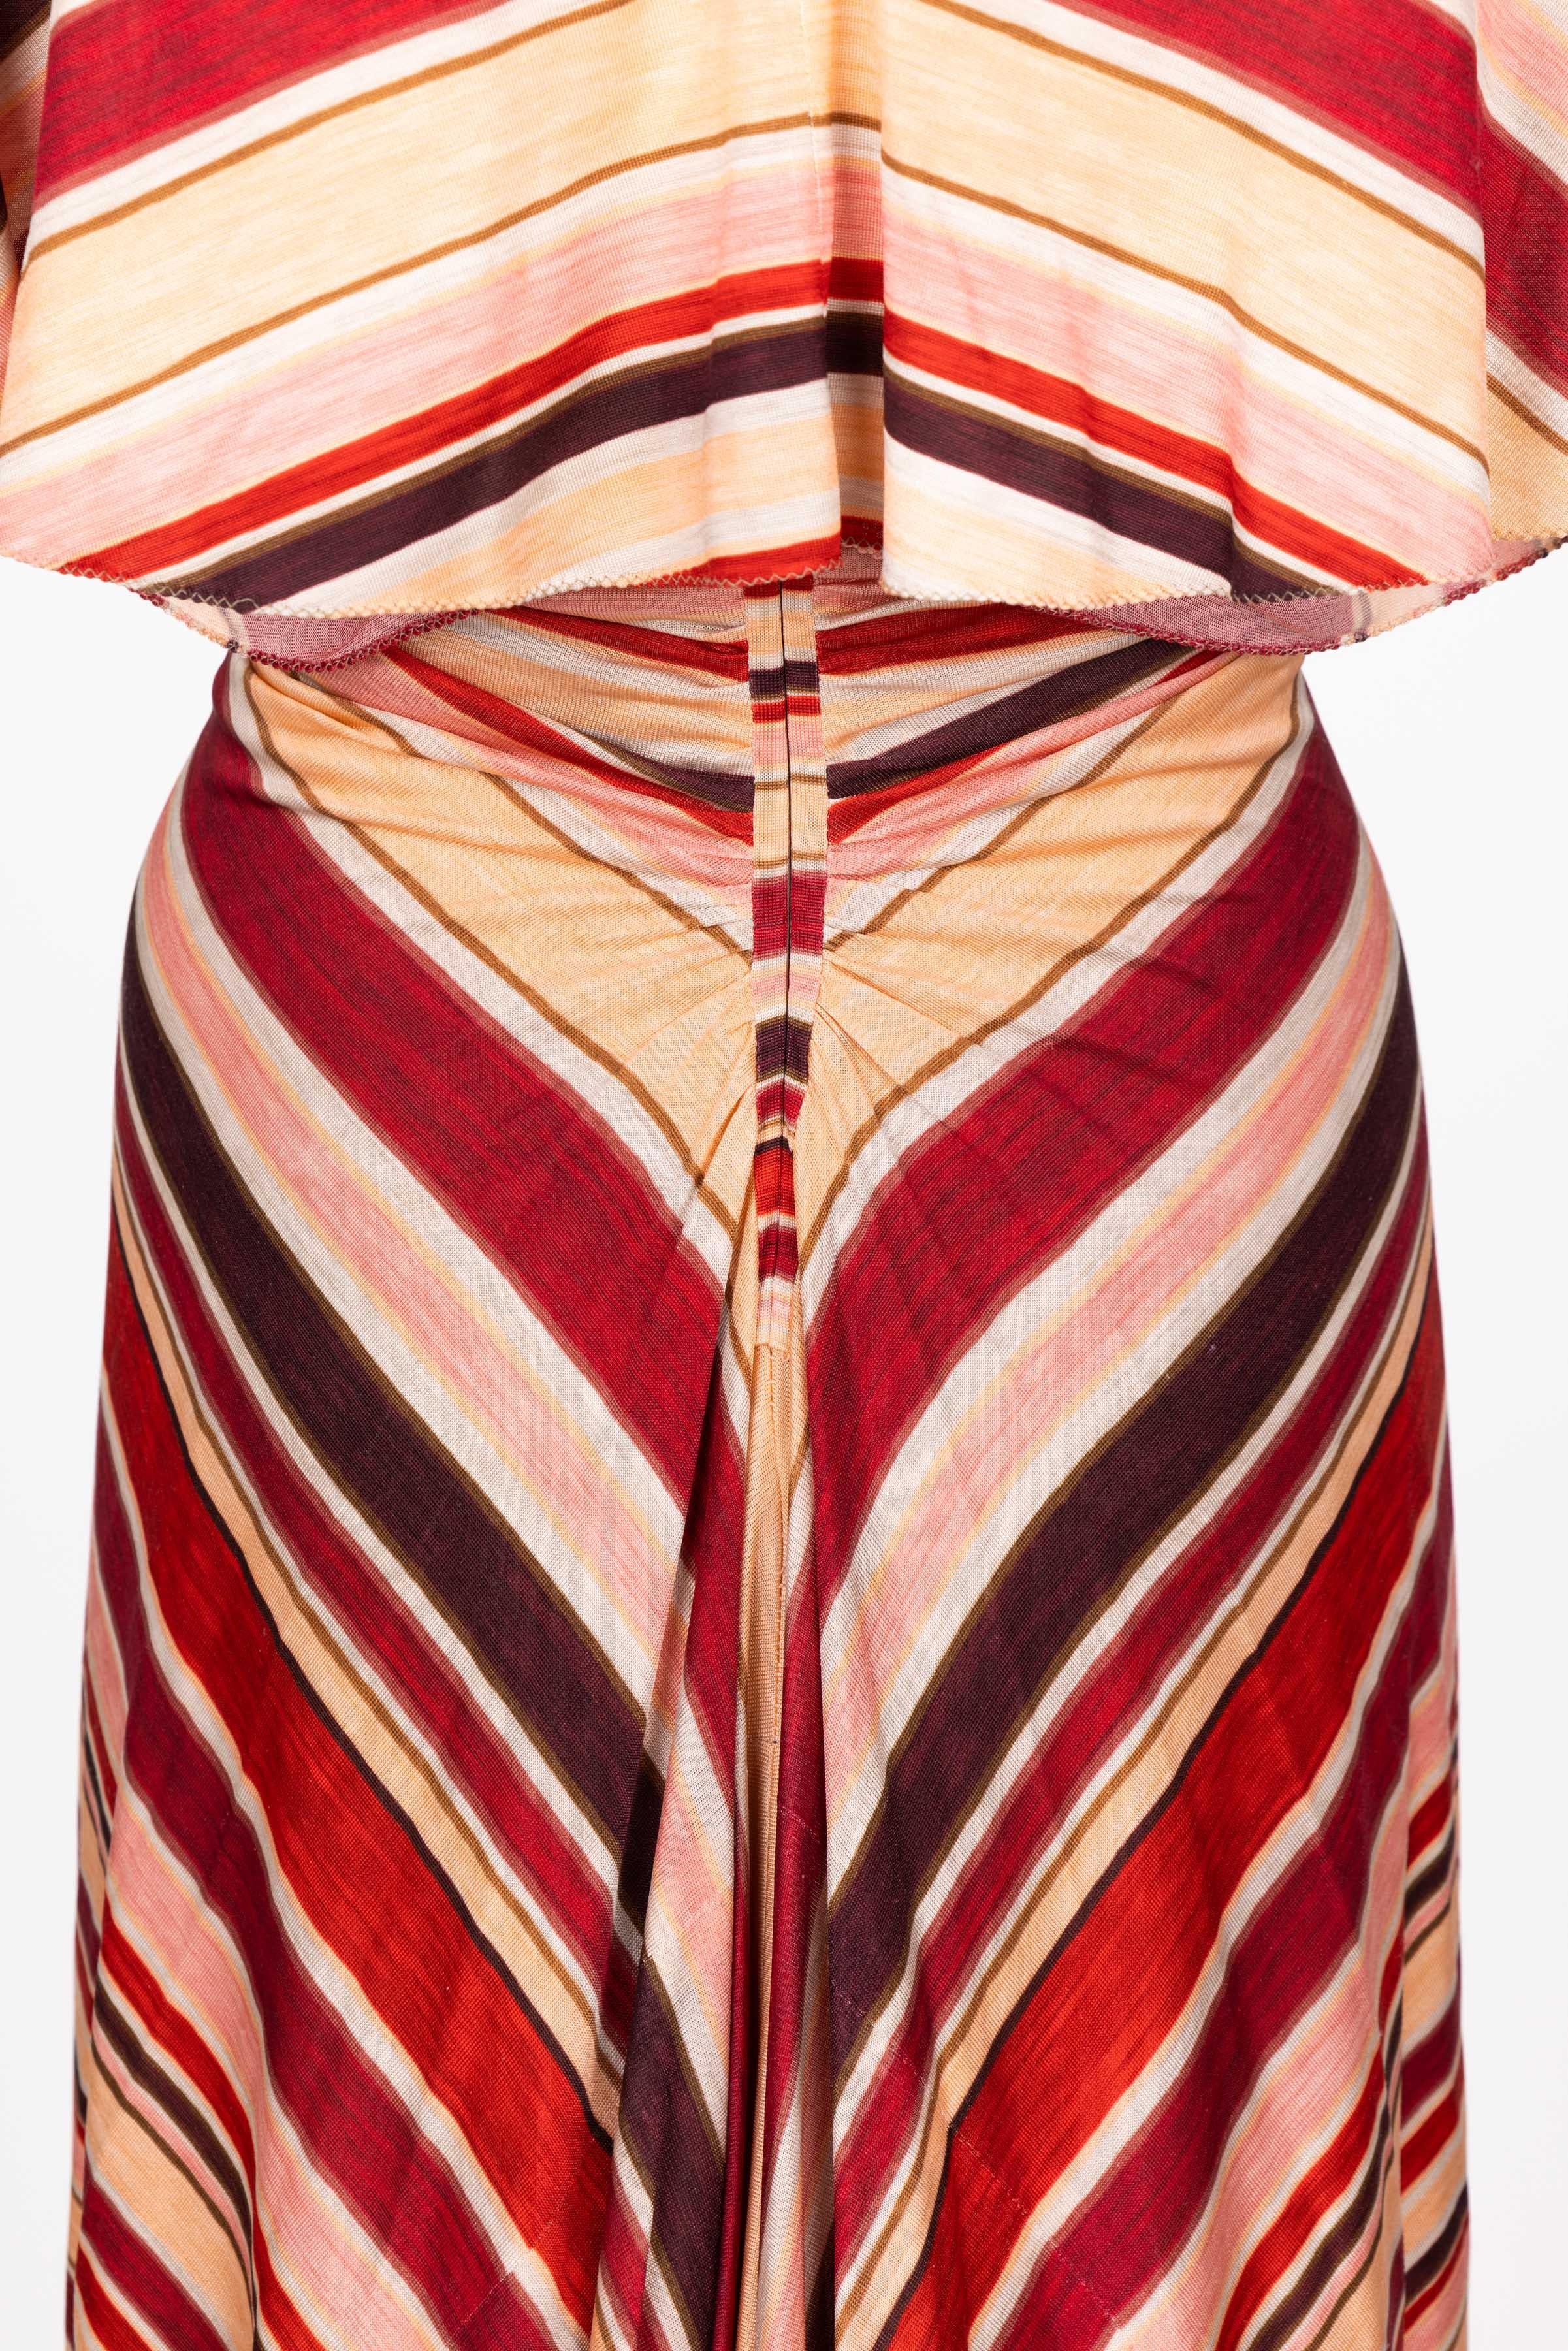 Marc Jacobs Spring 2011 Red & Pink Striped Silk Dress For Sale 7